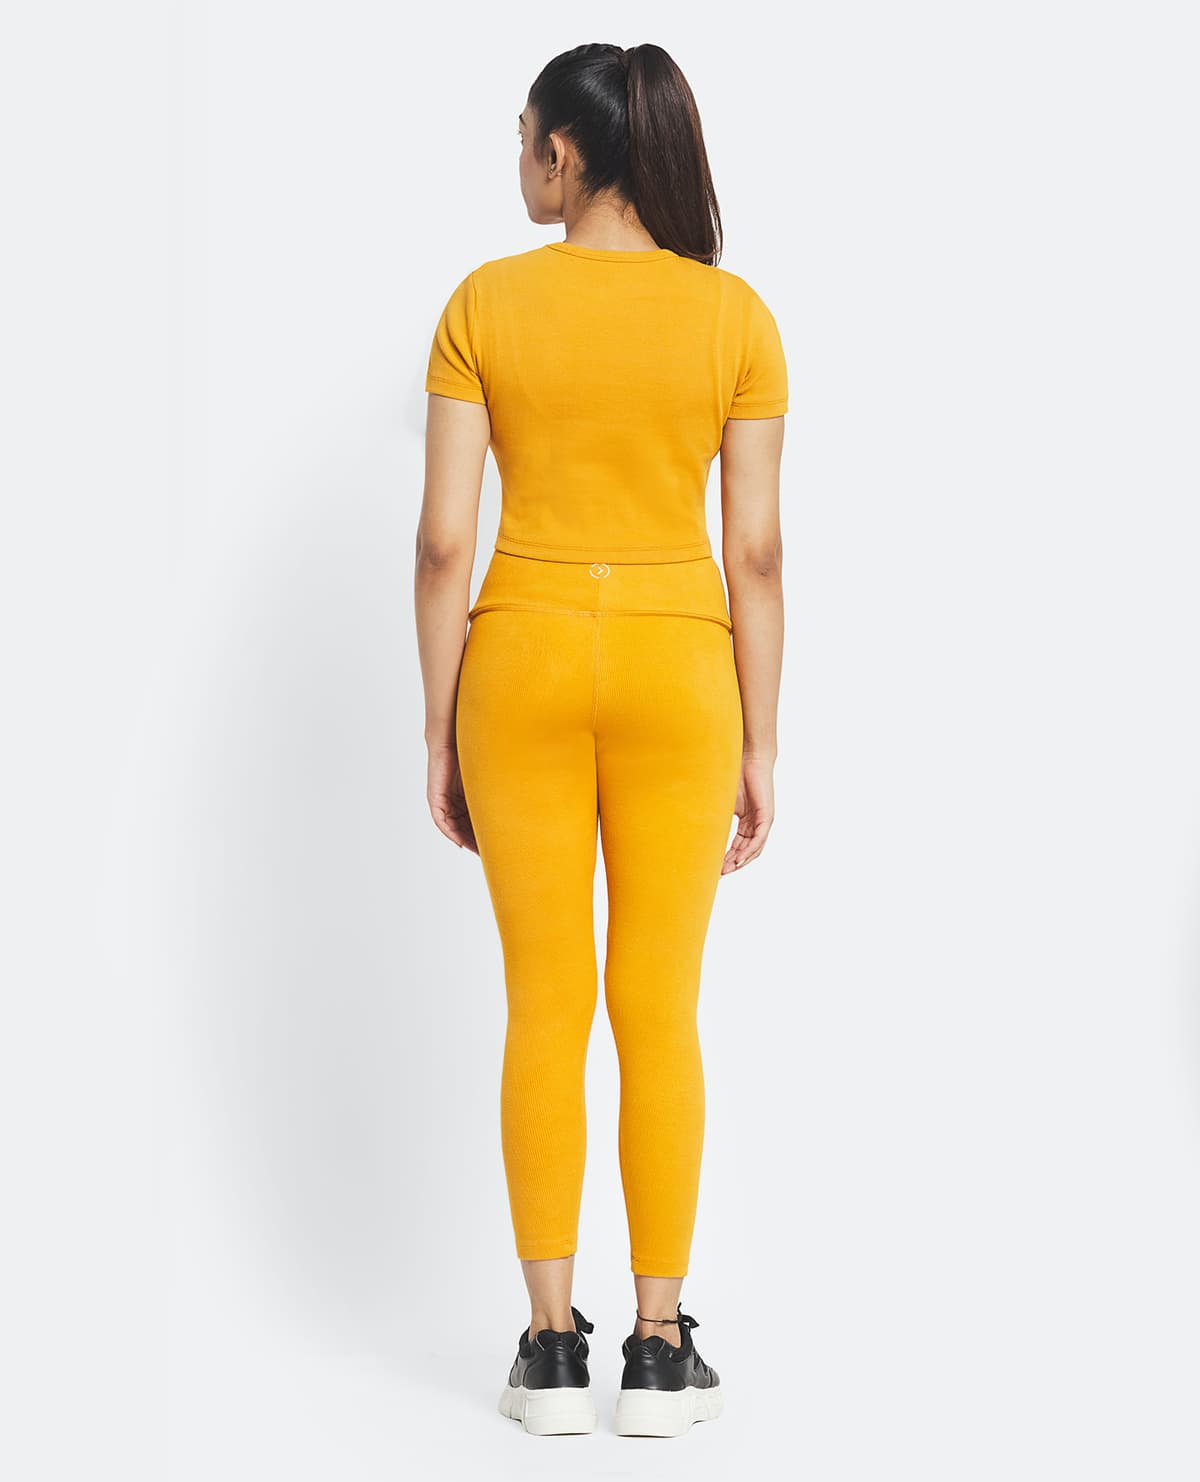 Soft & Stretchable, Ultra Smooth Honey Leggings – Kica Active